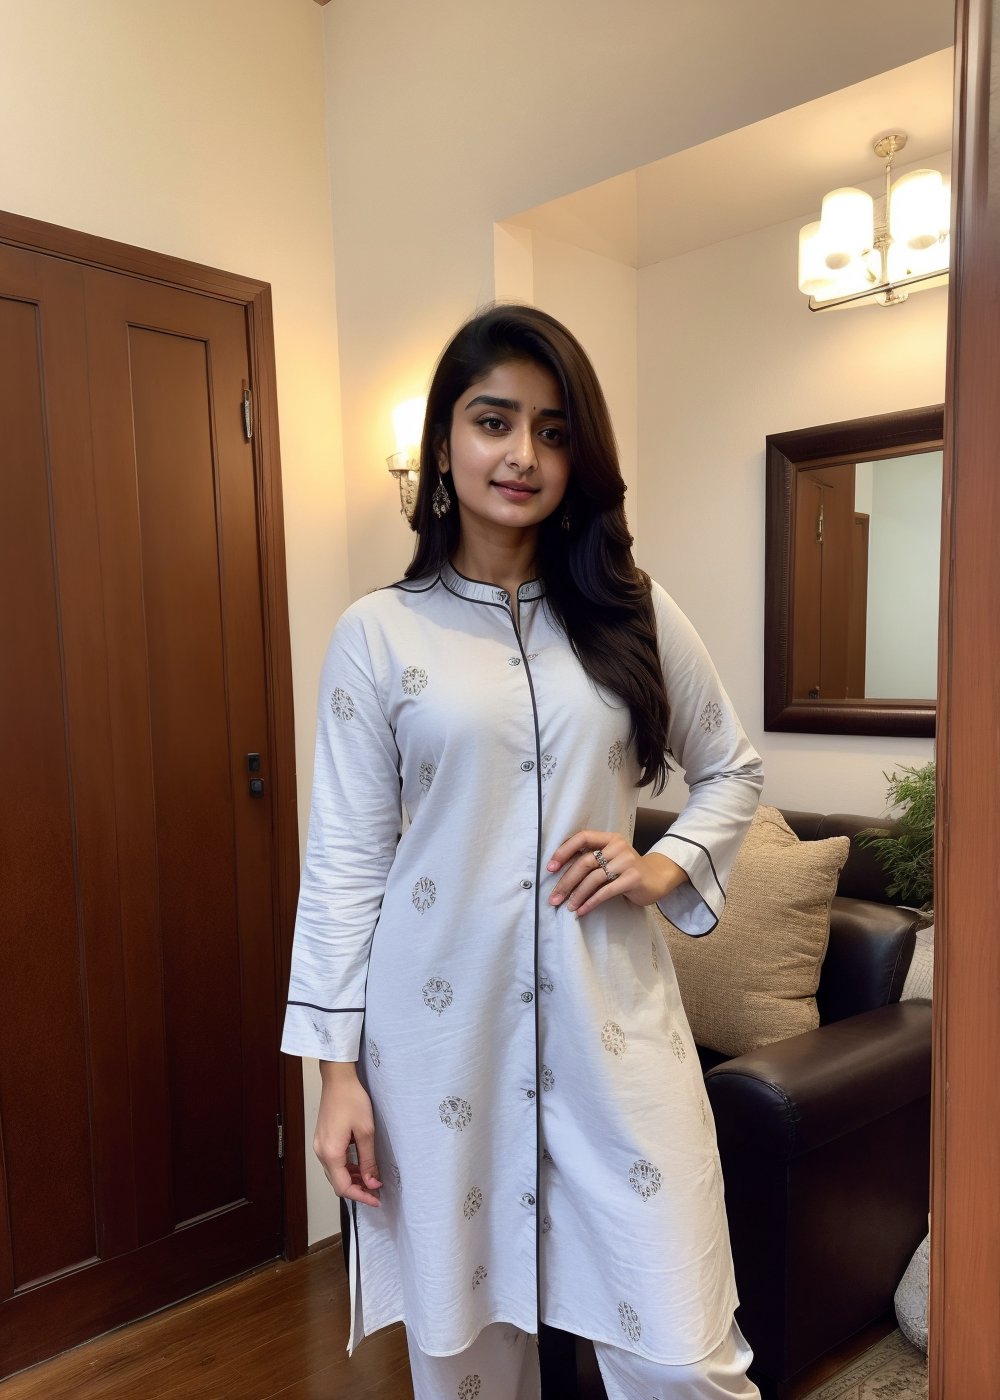 Lovely cute hot Alia Bhatt, acute an Instagram model 22 years old, full-length, long blonde_hair, black hair, winter, in a Mal , Indian, wearing a Pakistai dress Kurti pajama, Lives text on top, thin shaped_body,